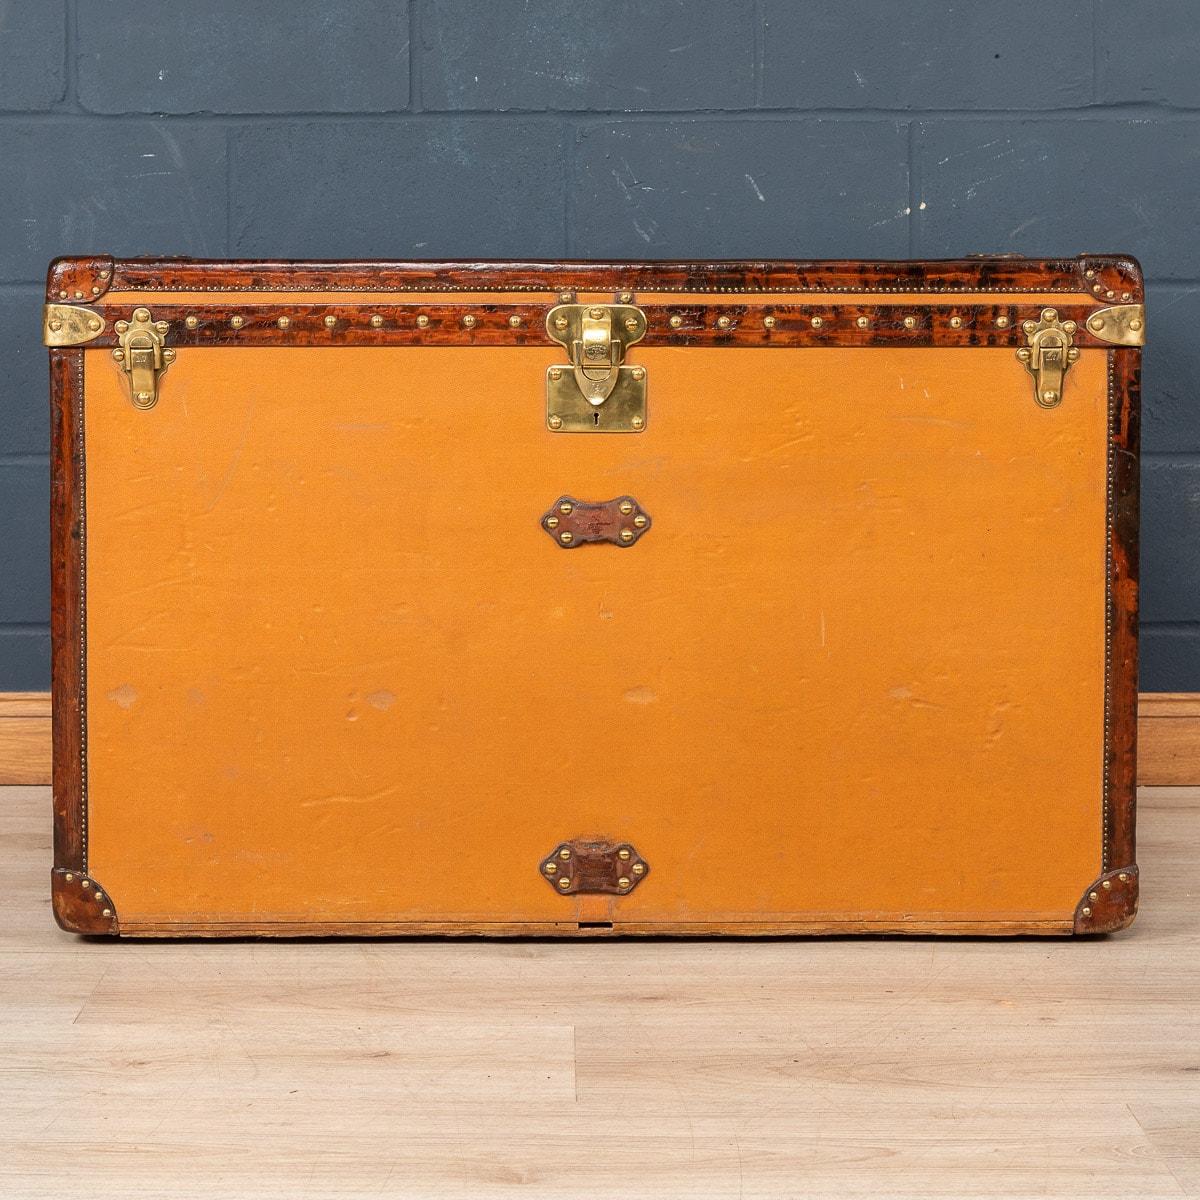 A very rare Louis Vuitton “high trunk” trunk (from French “Malle Haute”), circa 1900's, features orange “Vuittonite“ canvas, all brass hardware, and leather trims. It is rare to find these trunks in as good condition as this one. Trunks in this type